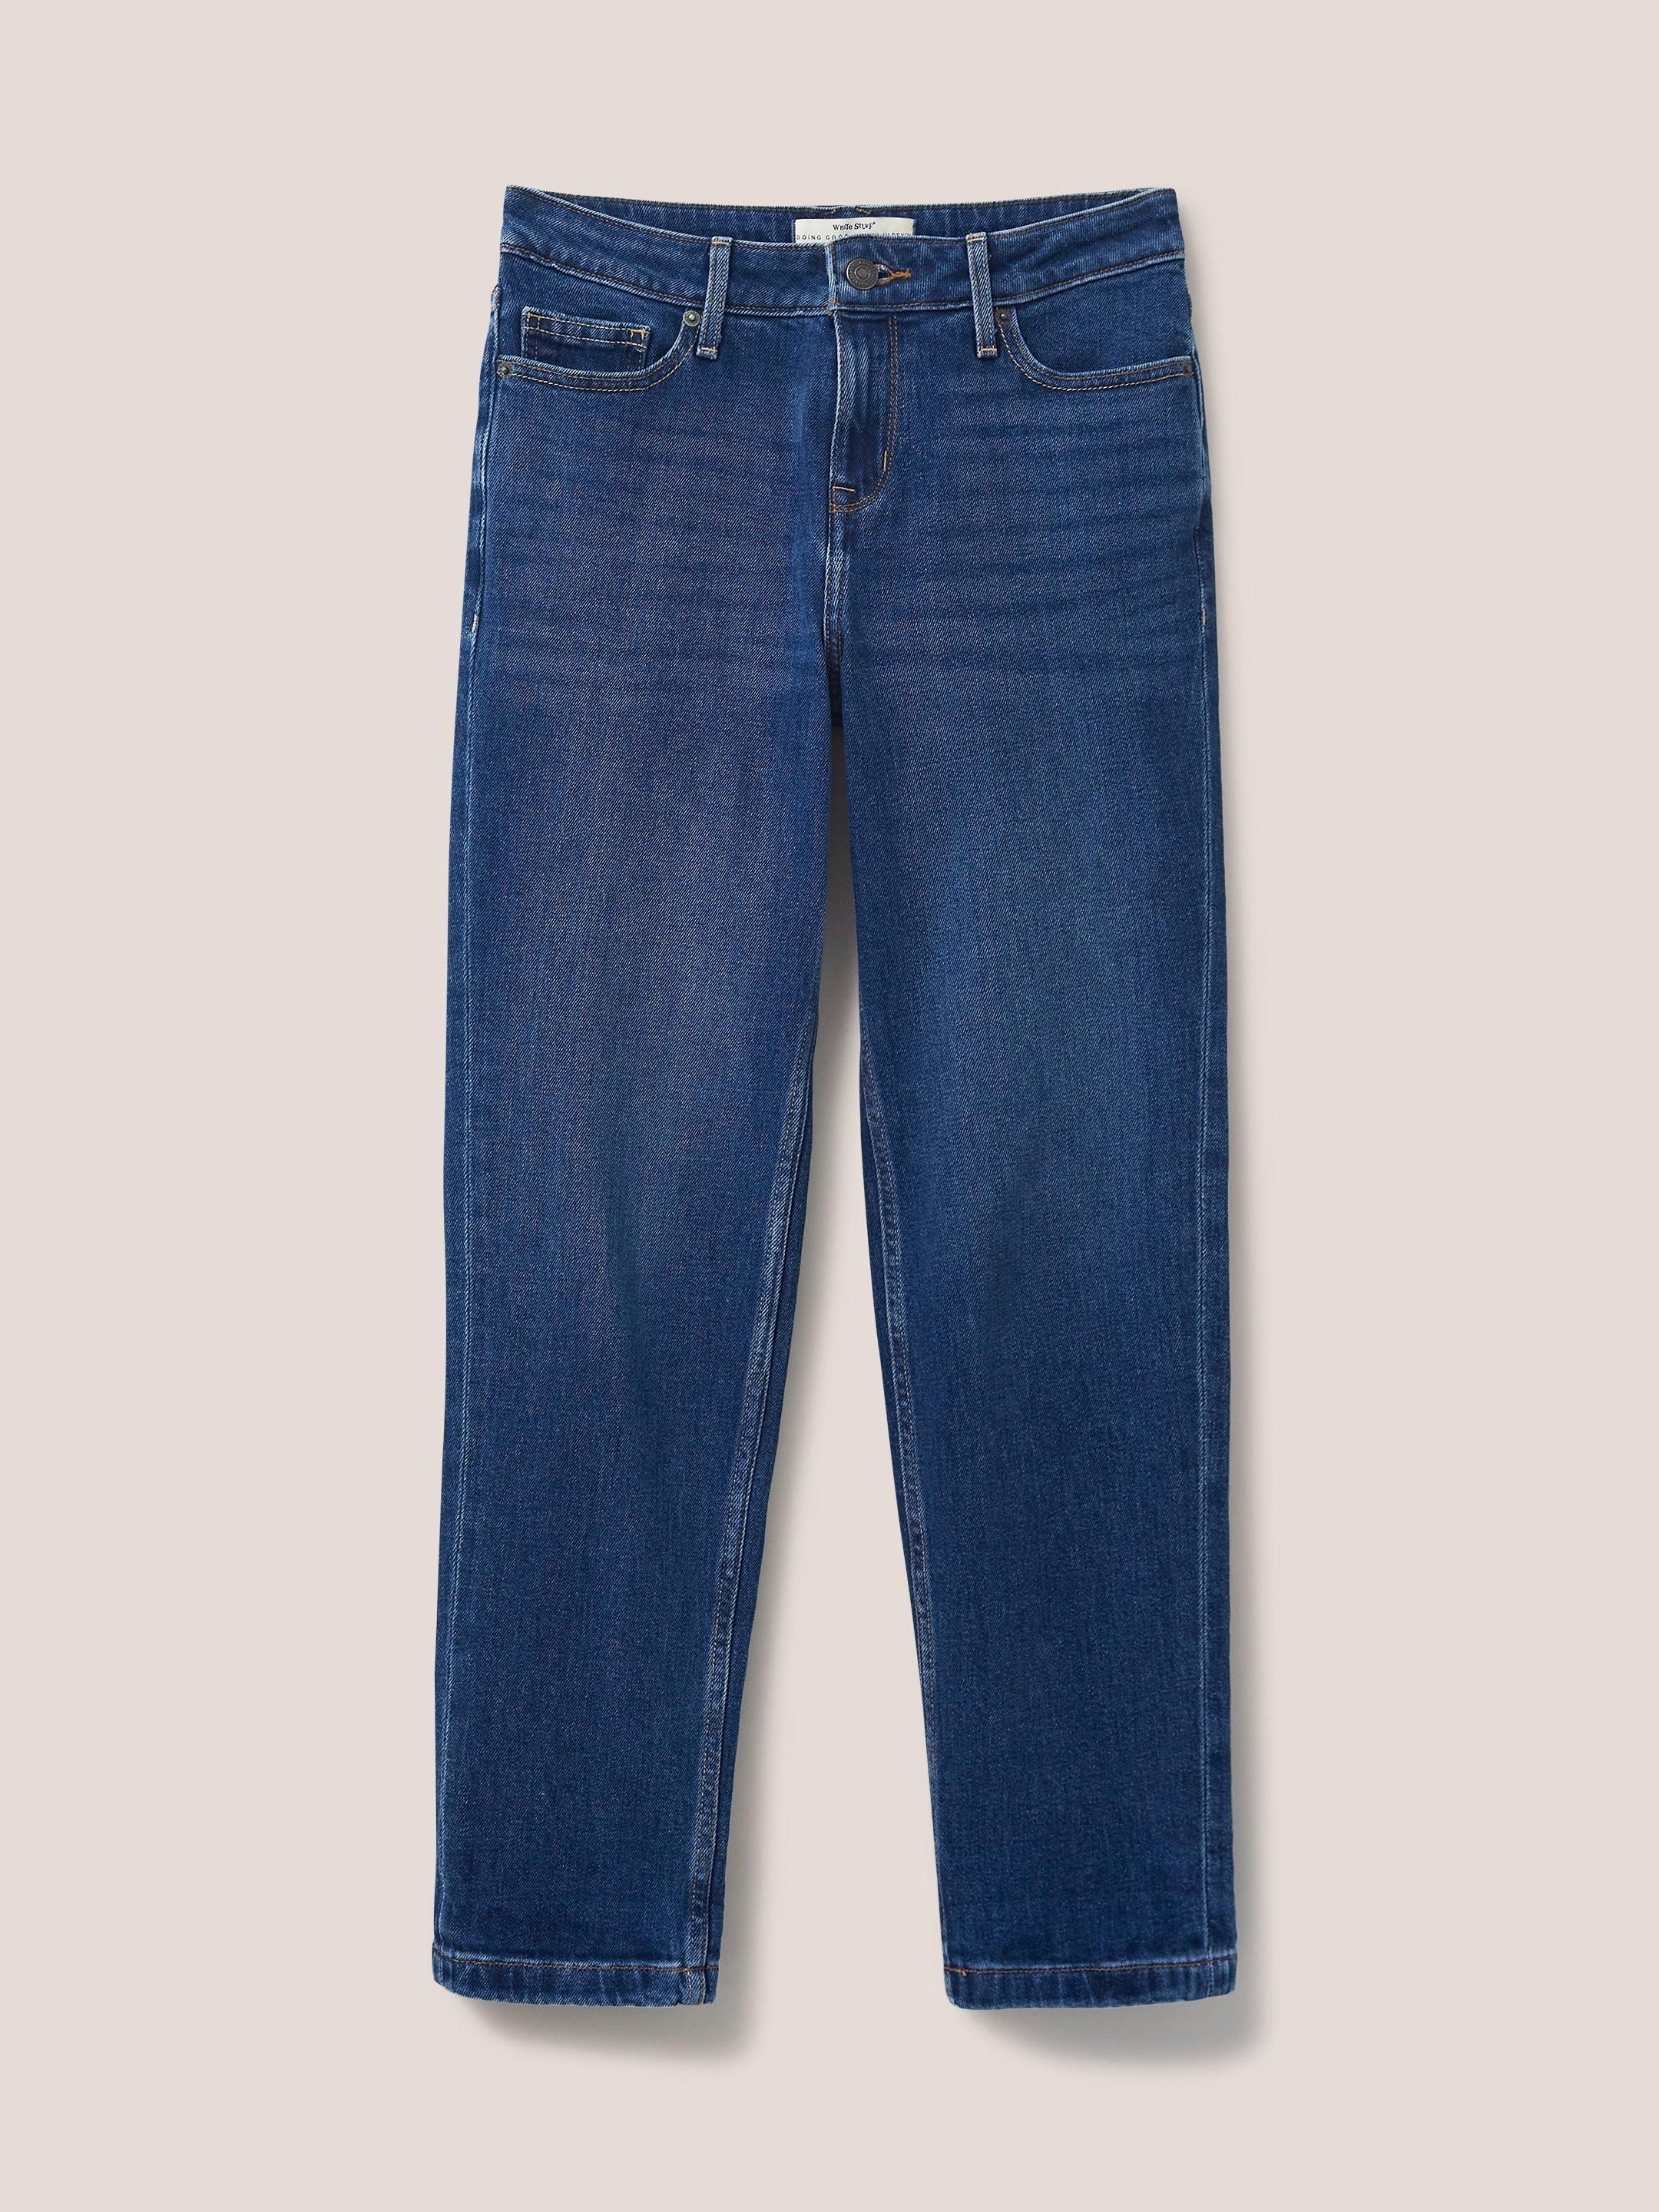 Katy Relaxed Slim Jean in MID DENIM - FLAT FRONT